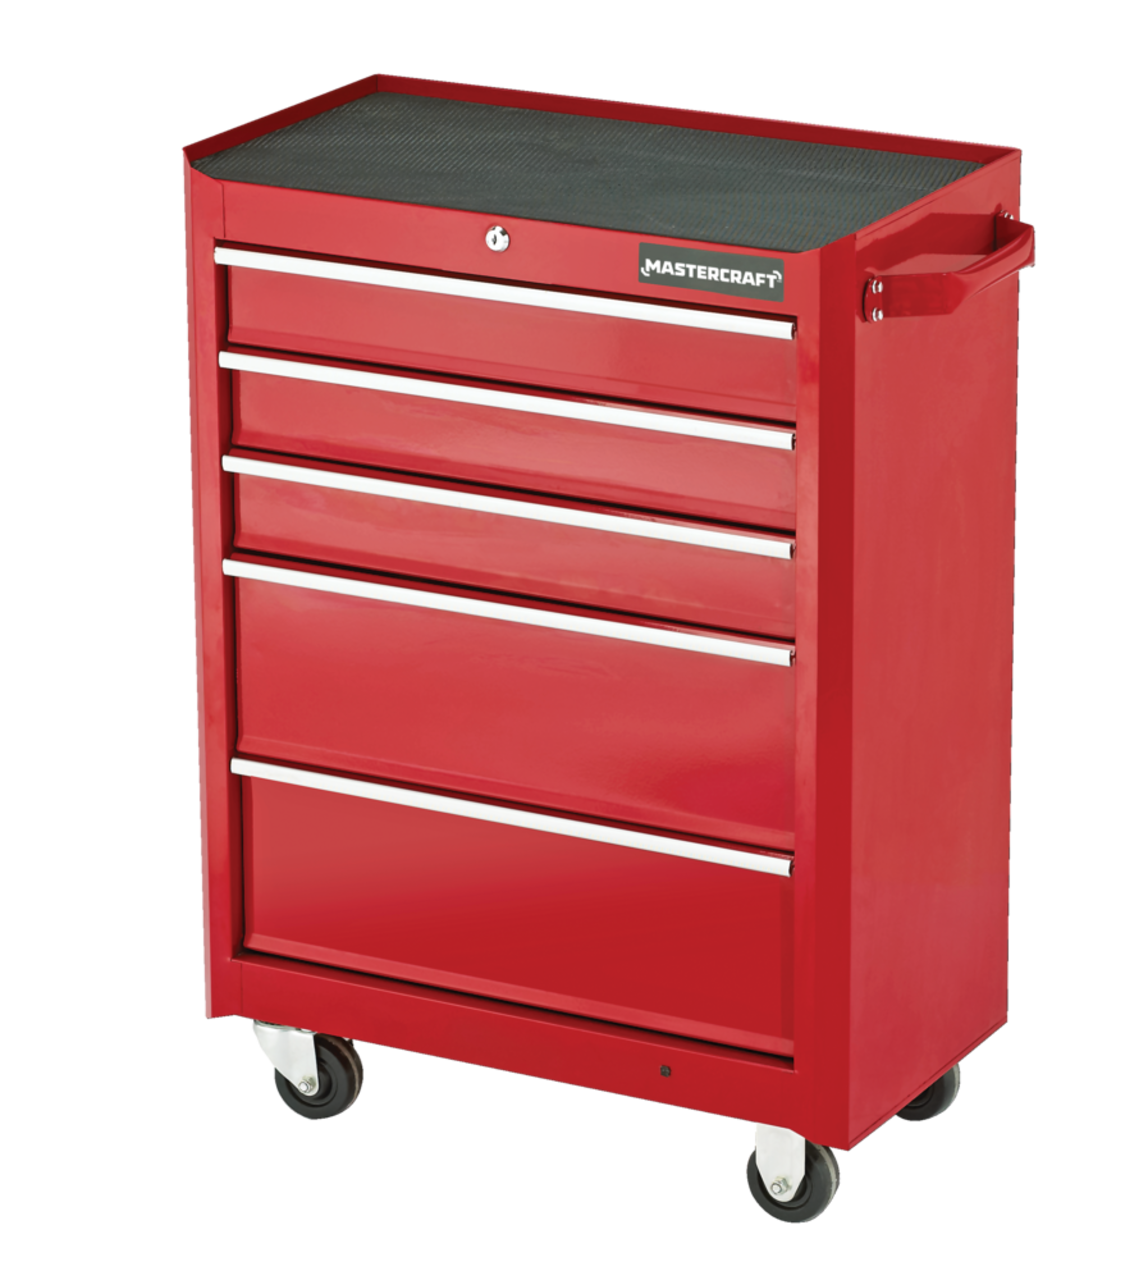 Mastercraft Rolling Tools Storage Cabinet with 5 Drawers, Deep Red, 24-in